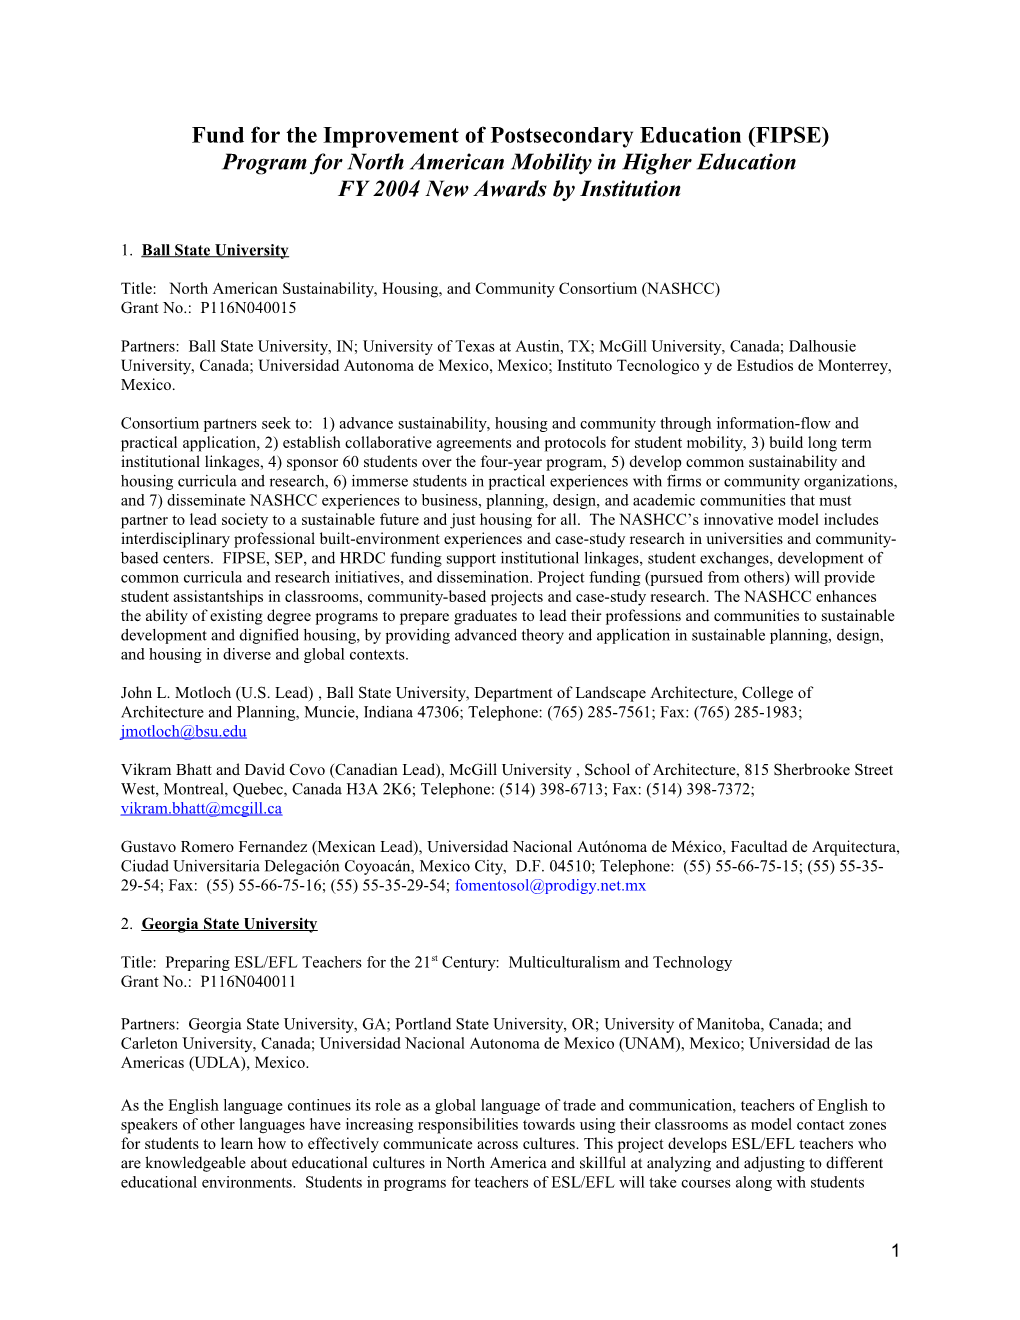 FY 2004 Project Abstracts for the Program for North American Mobility in Higher Education (PDF)